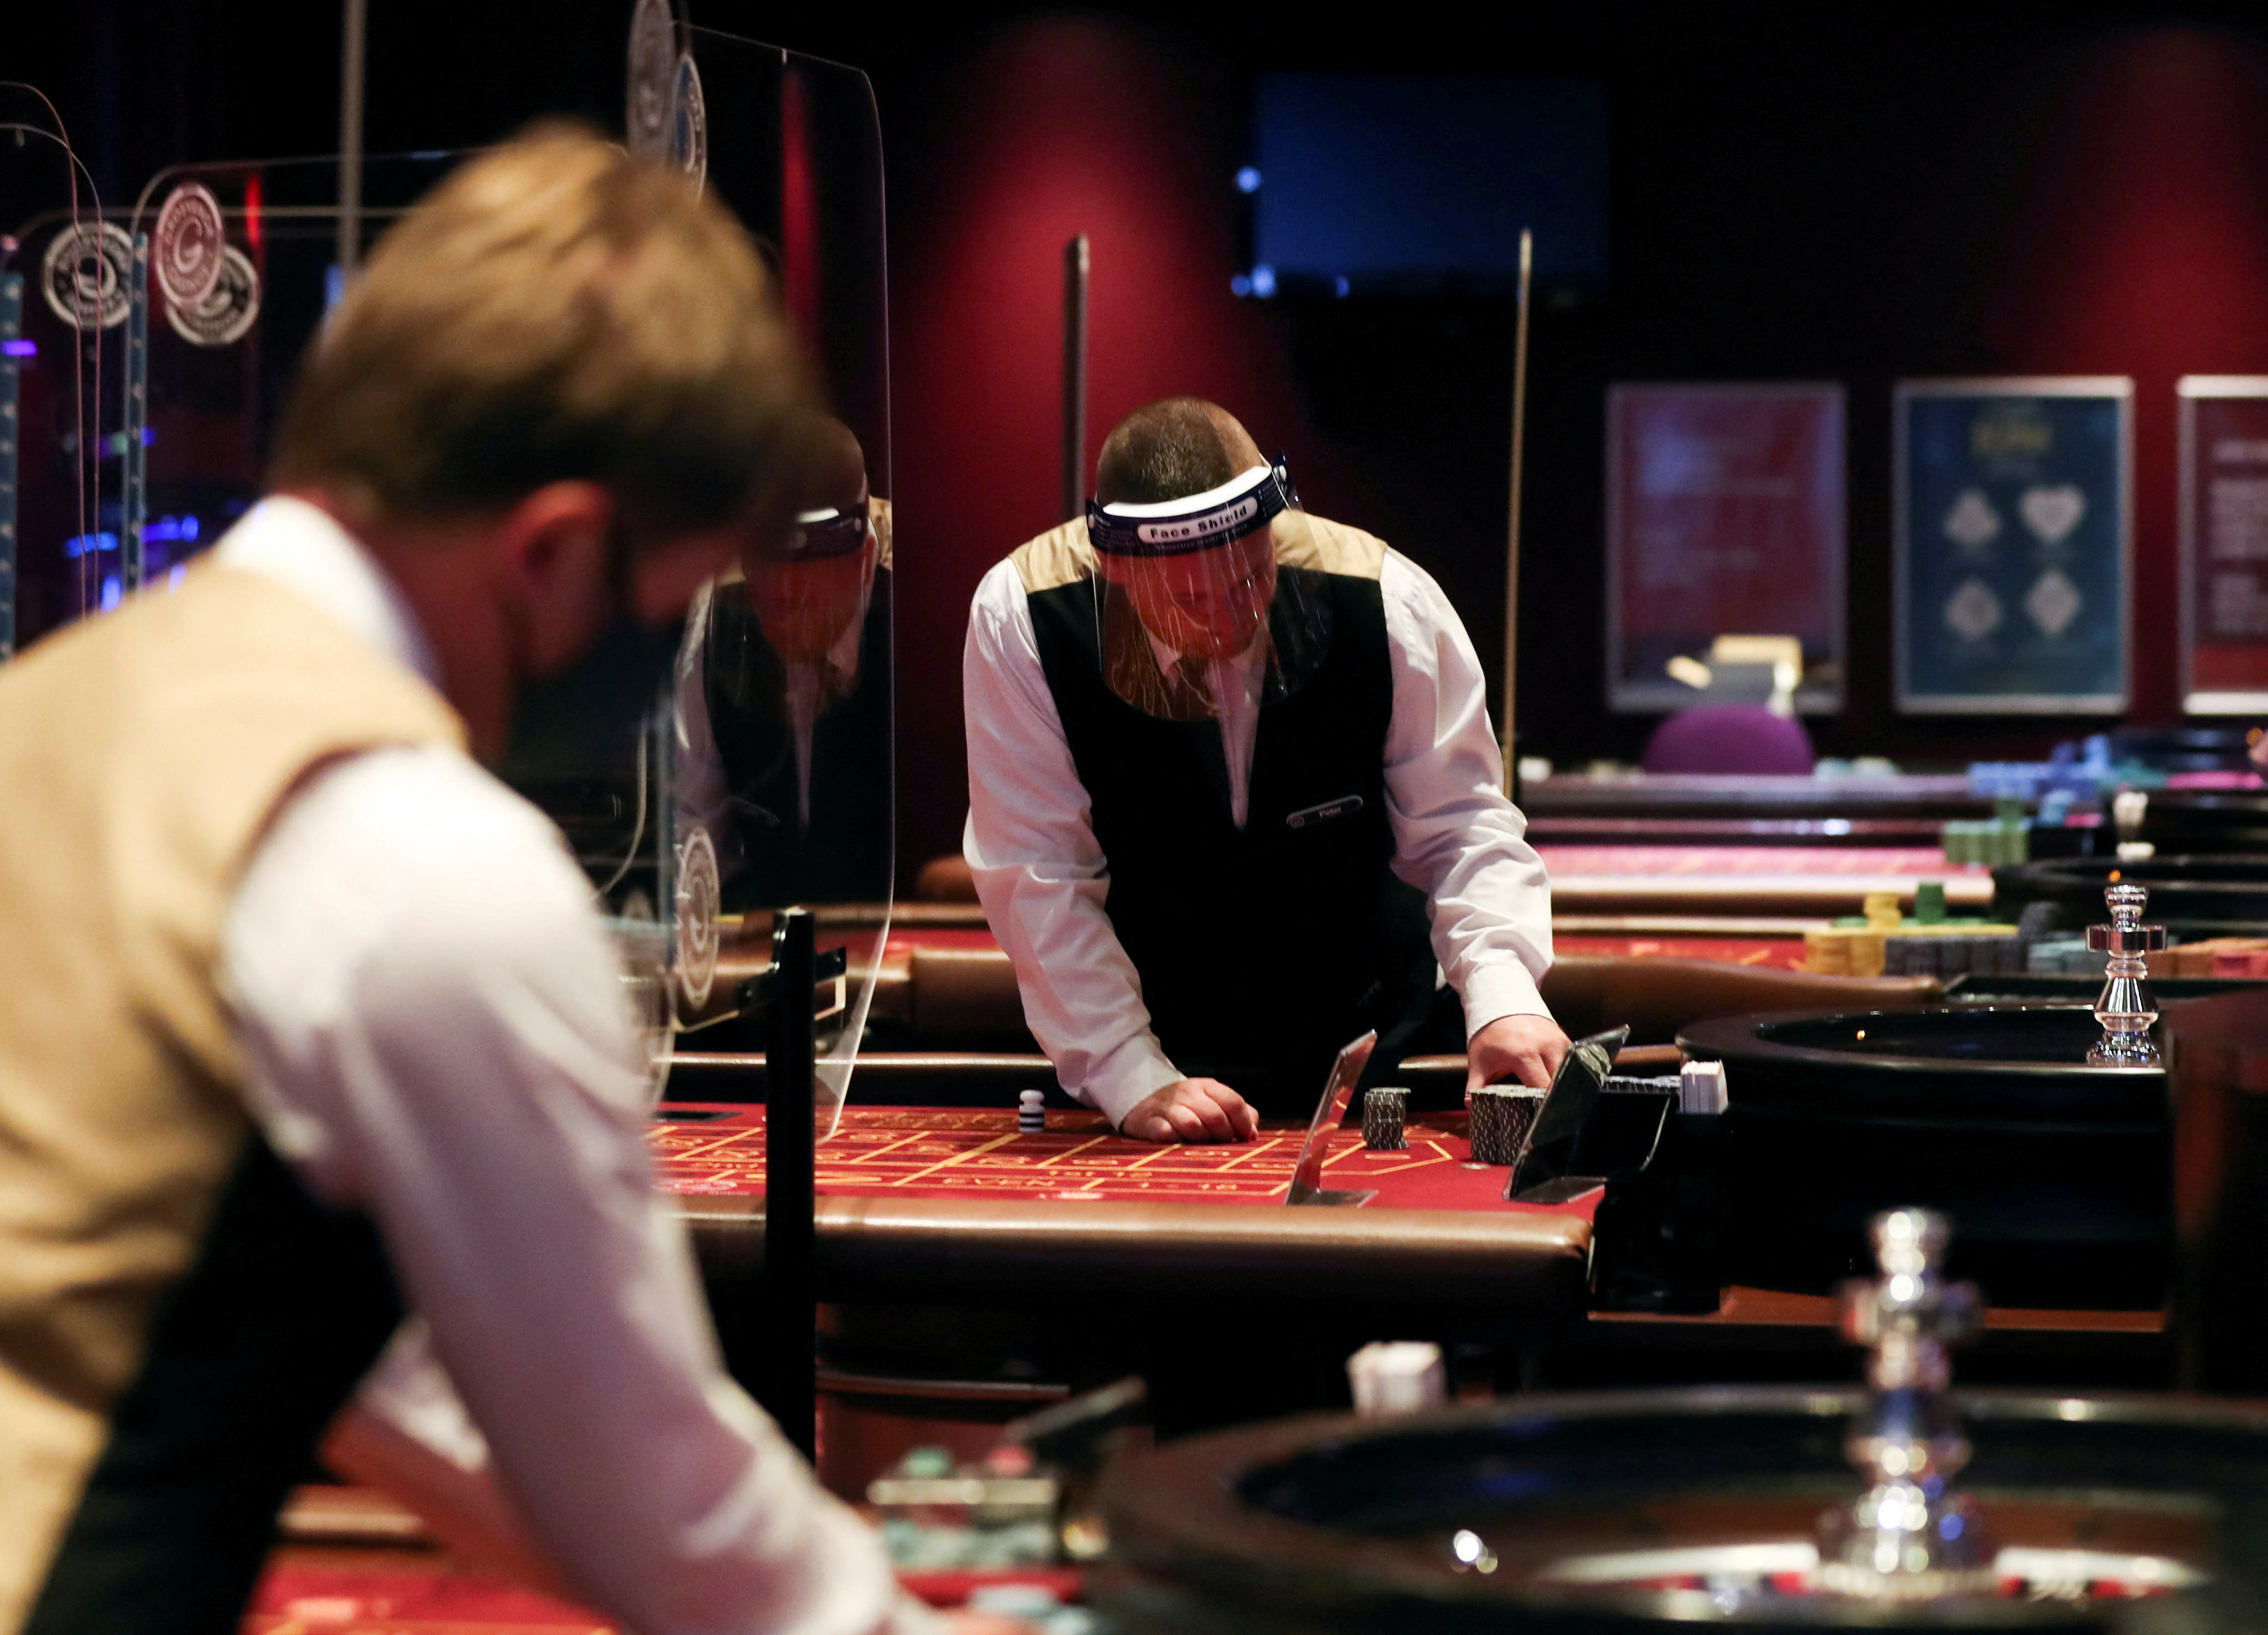 Casino in UK prepares to reopen, in Newcastle upon Tyne